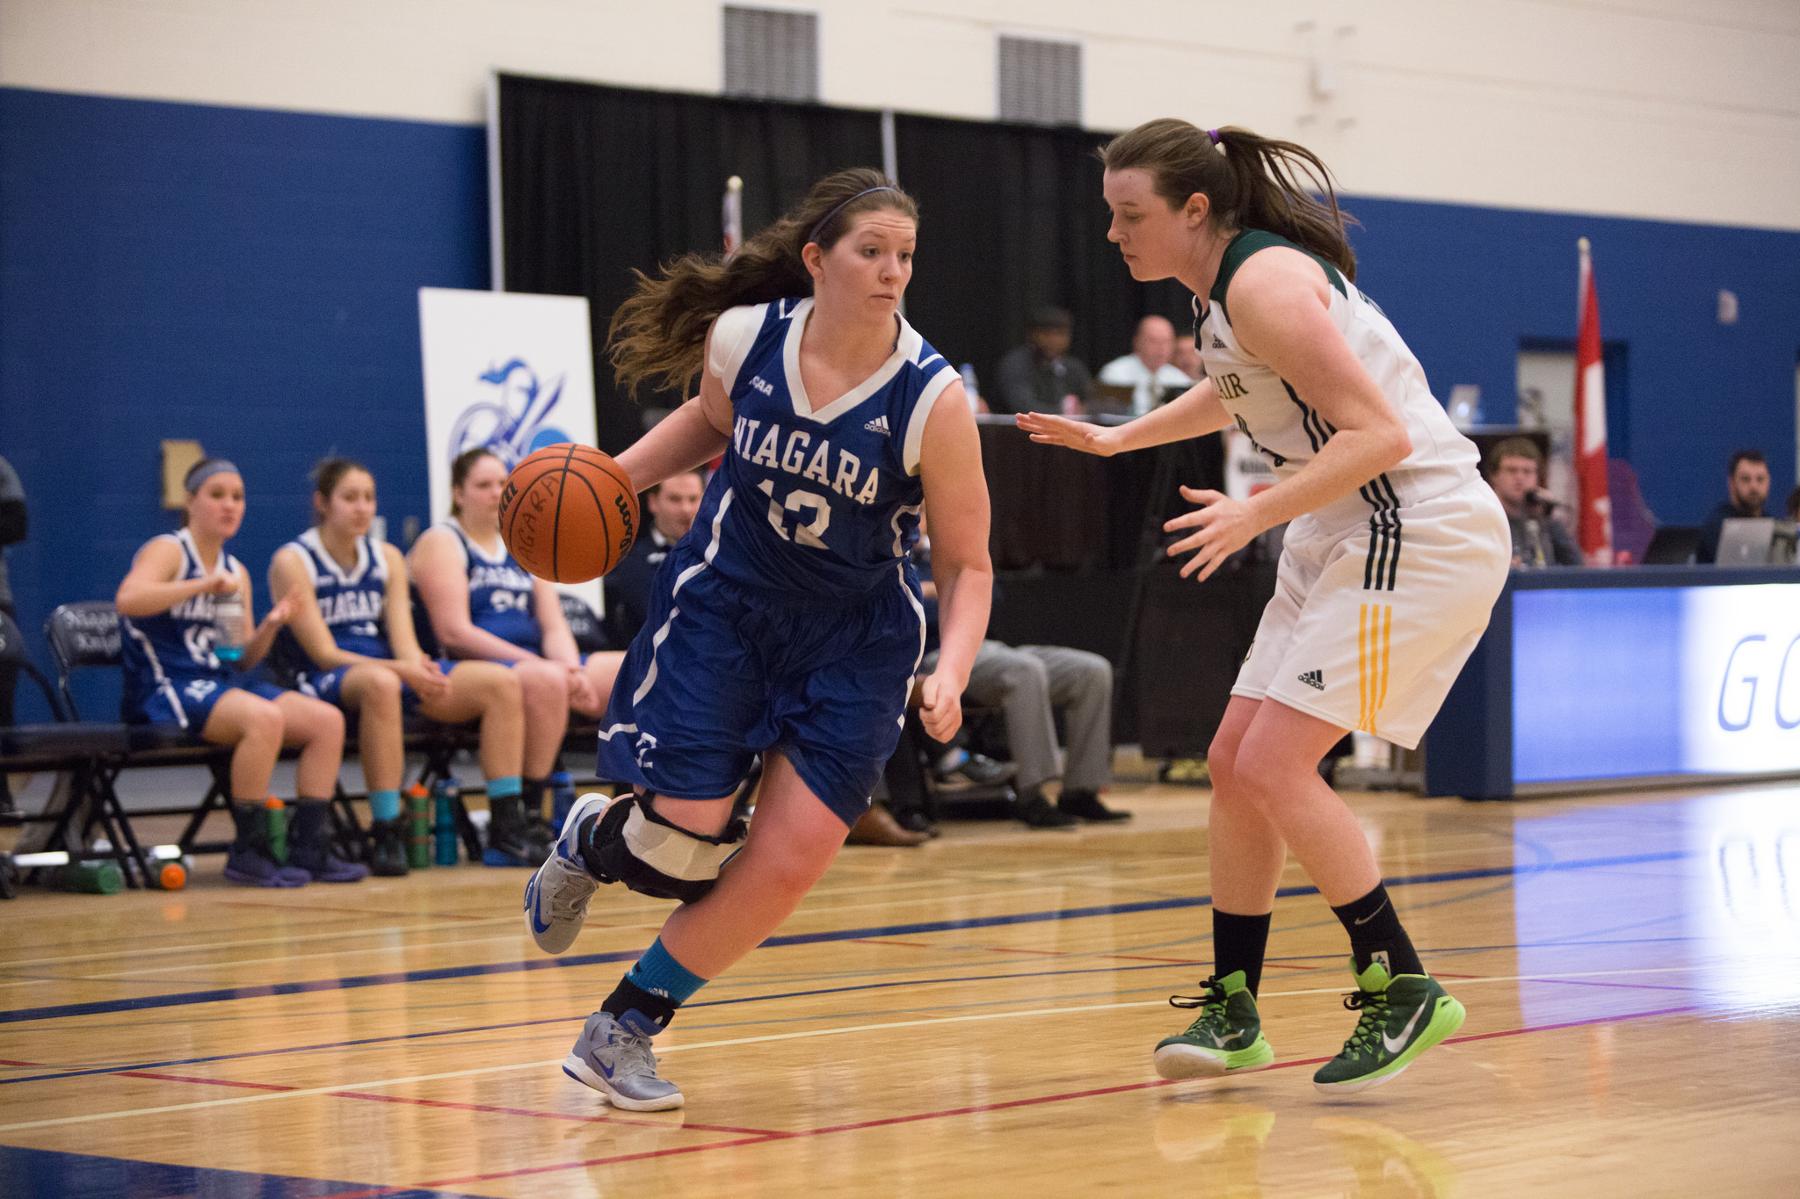 Knights end season on a winning note with consolation victory over St. Clair